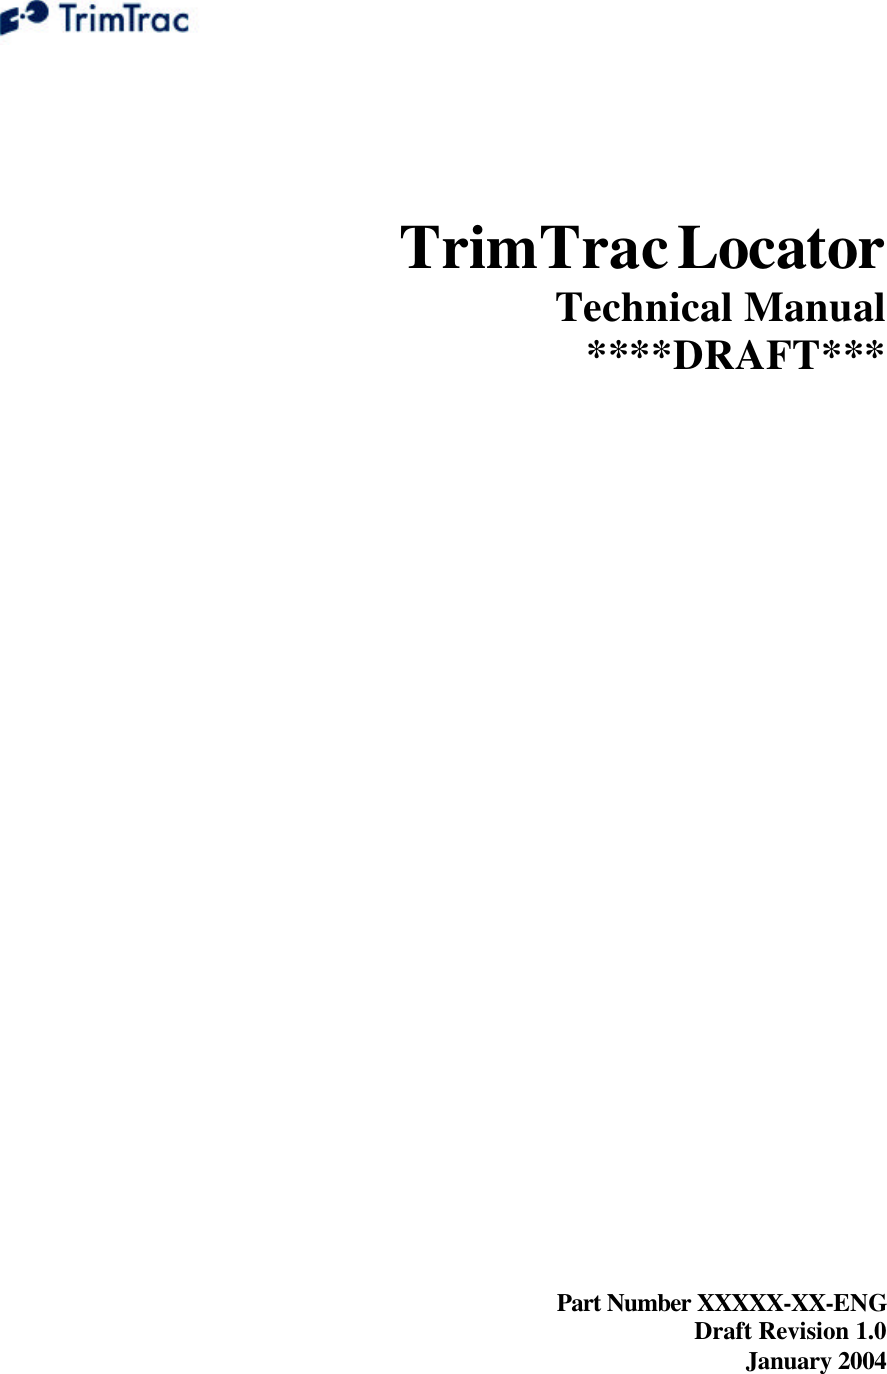    TrimTrac Locator  Technical Manual ****DRAFT***                     Part Number XXXXX-XX-ENG Draft Revision 1.0 January 2004 